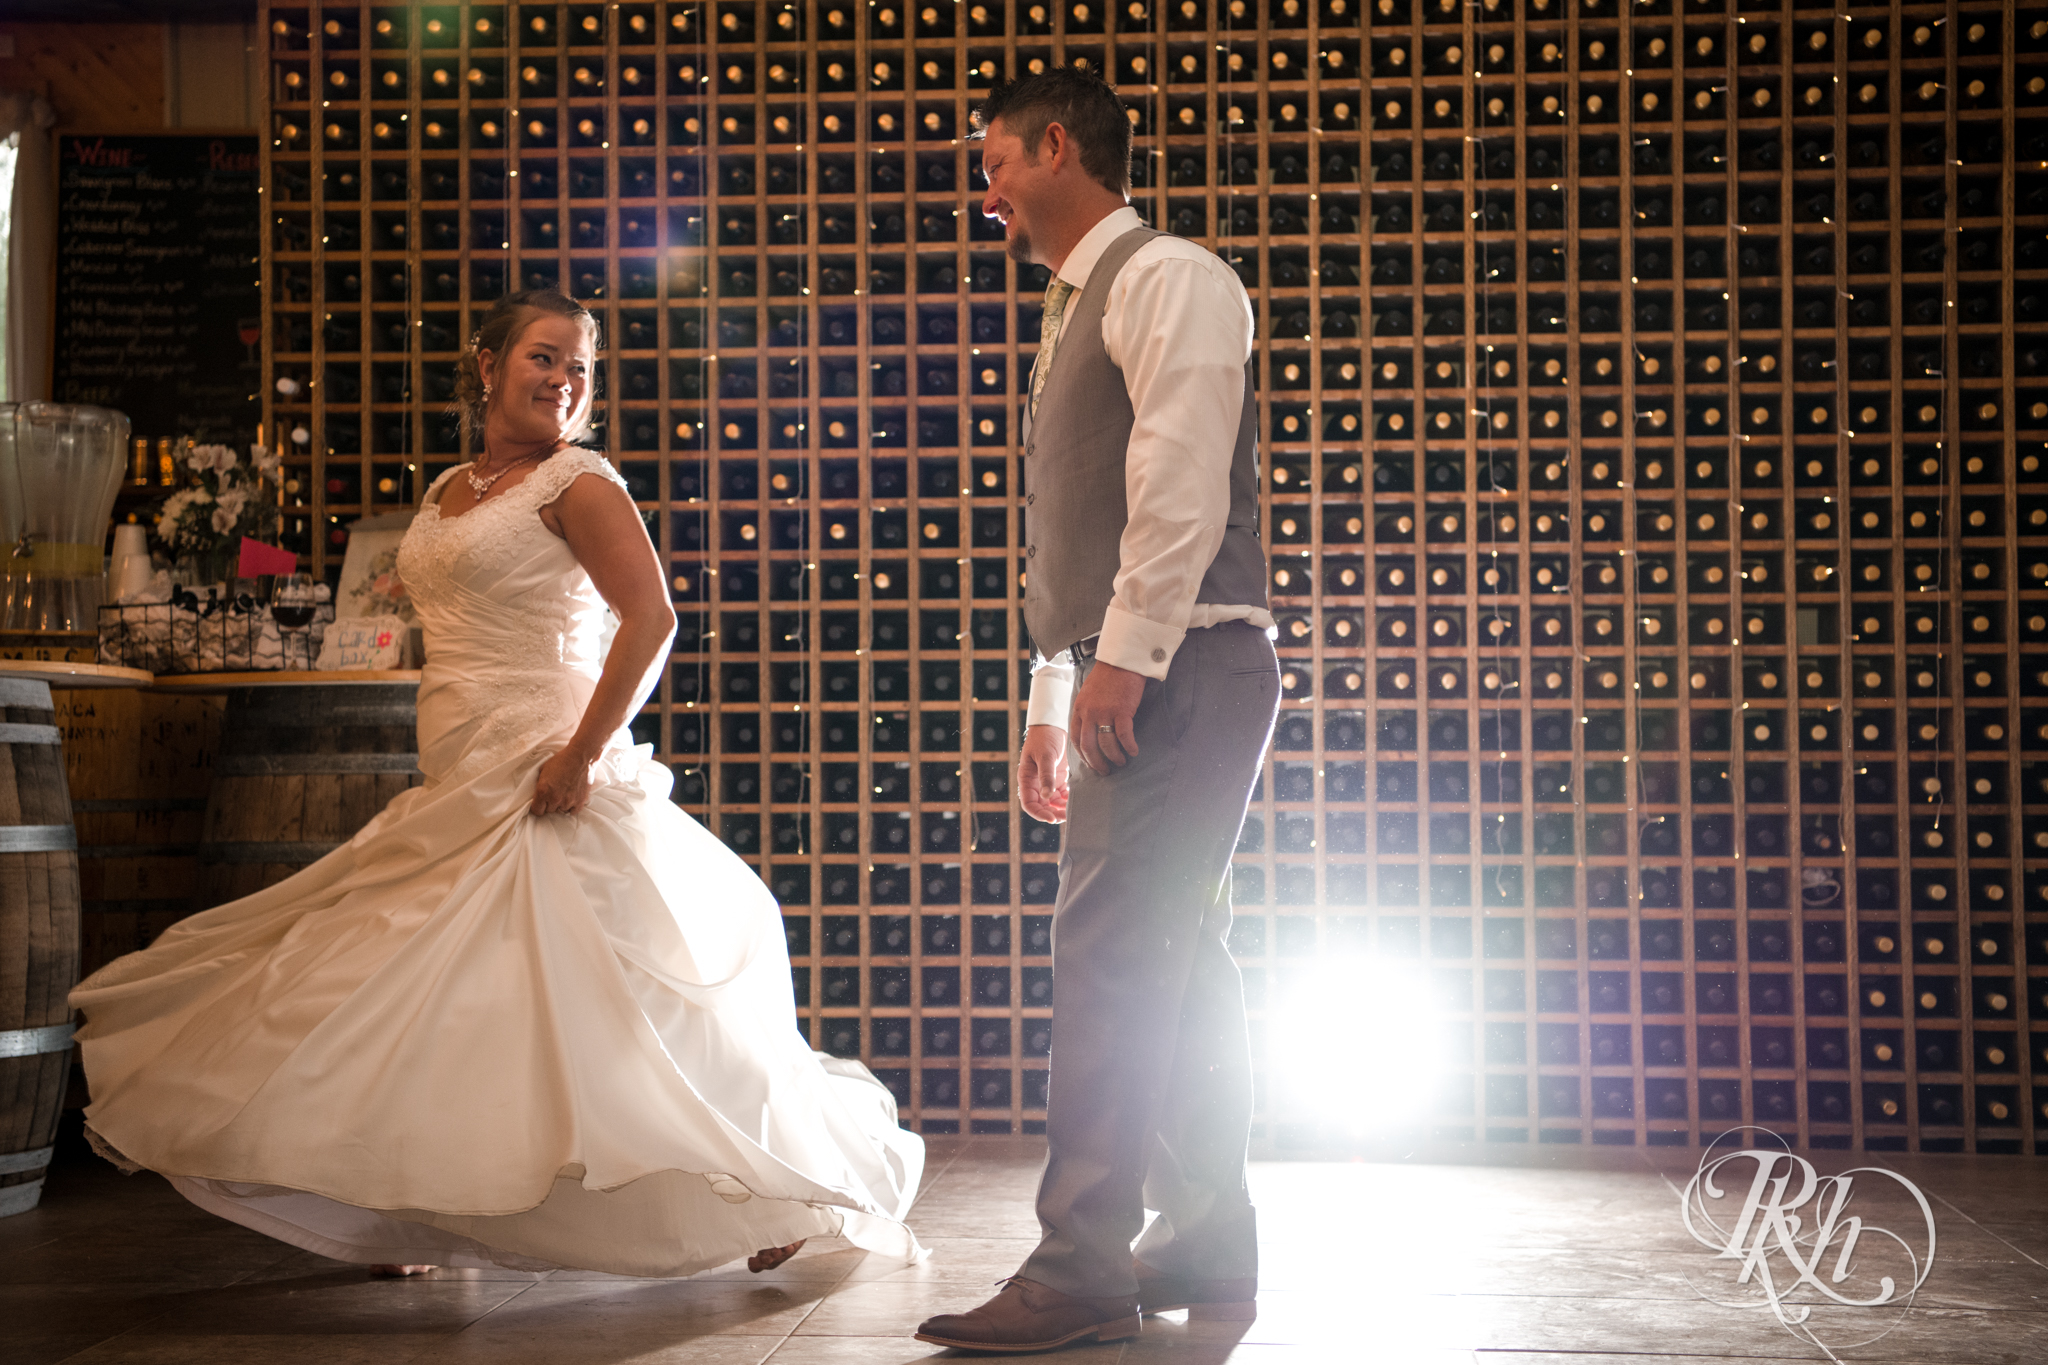 Bride and groom sharing first dance at Next Chapter Winery in New Prague, Minnesota.